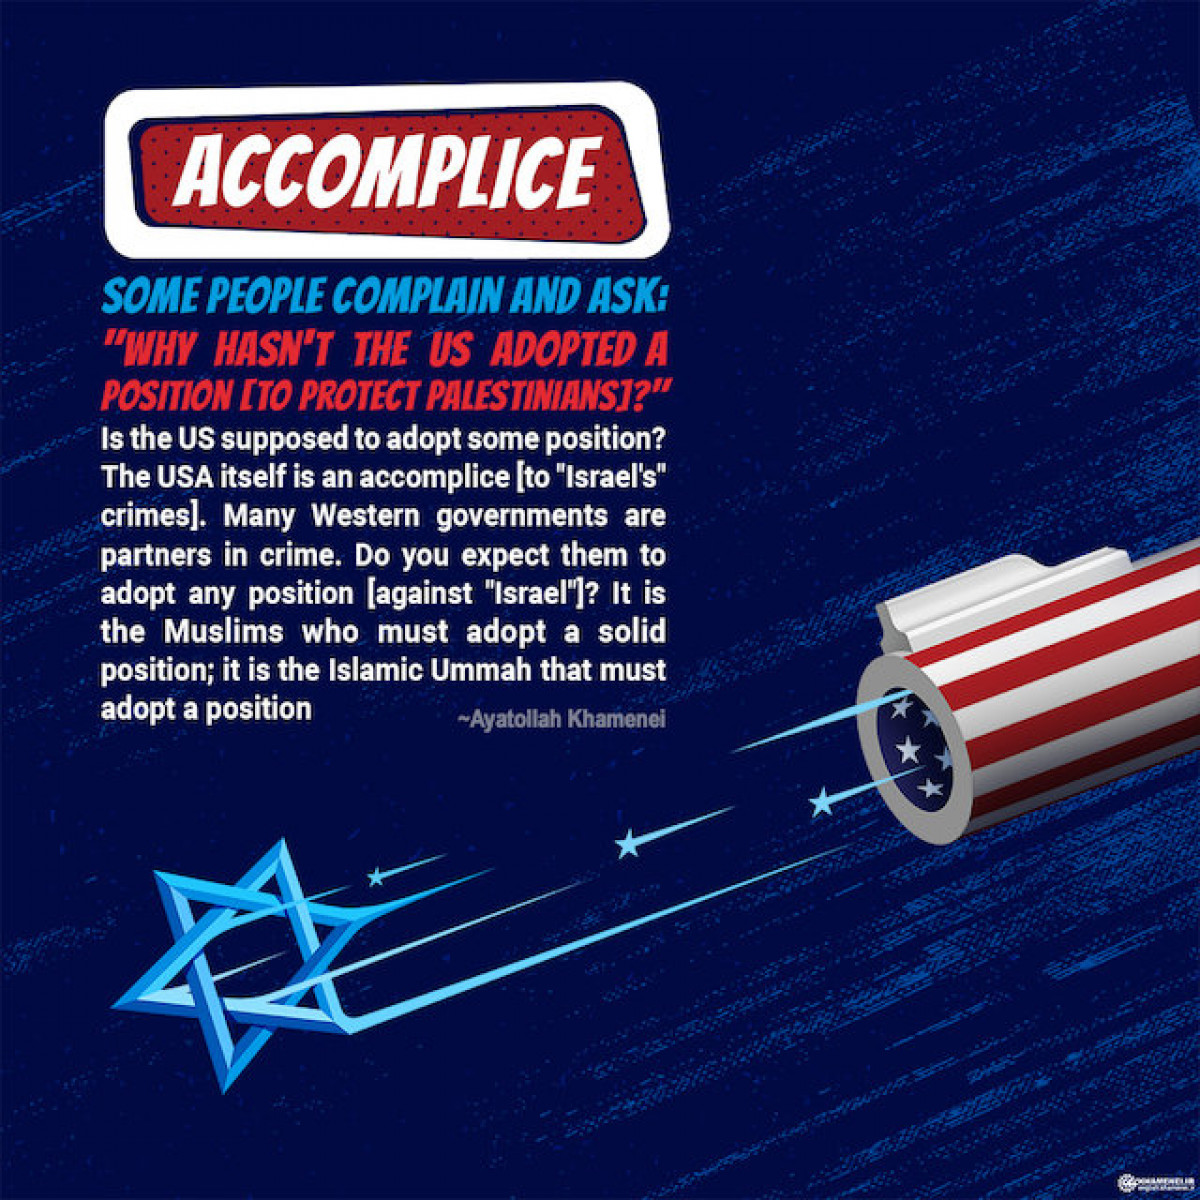 The U.S.A. is an accomplice to "Israel's" crimes